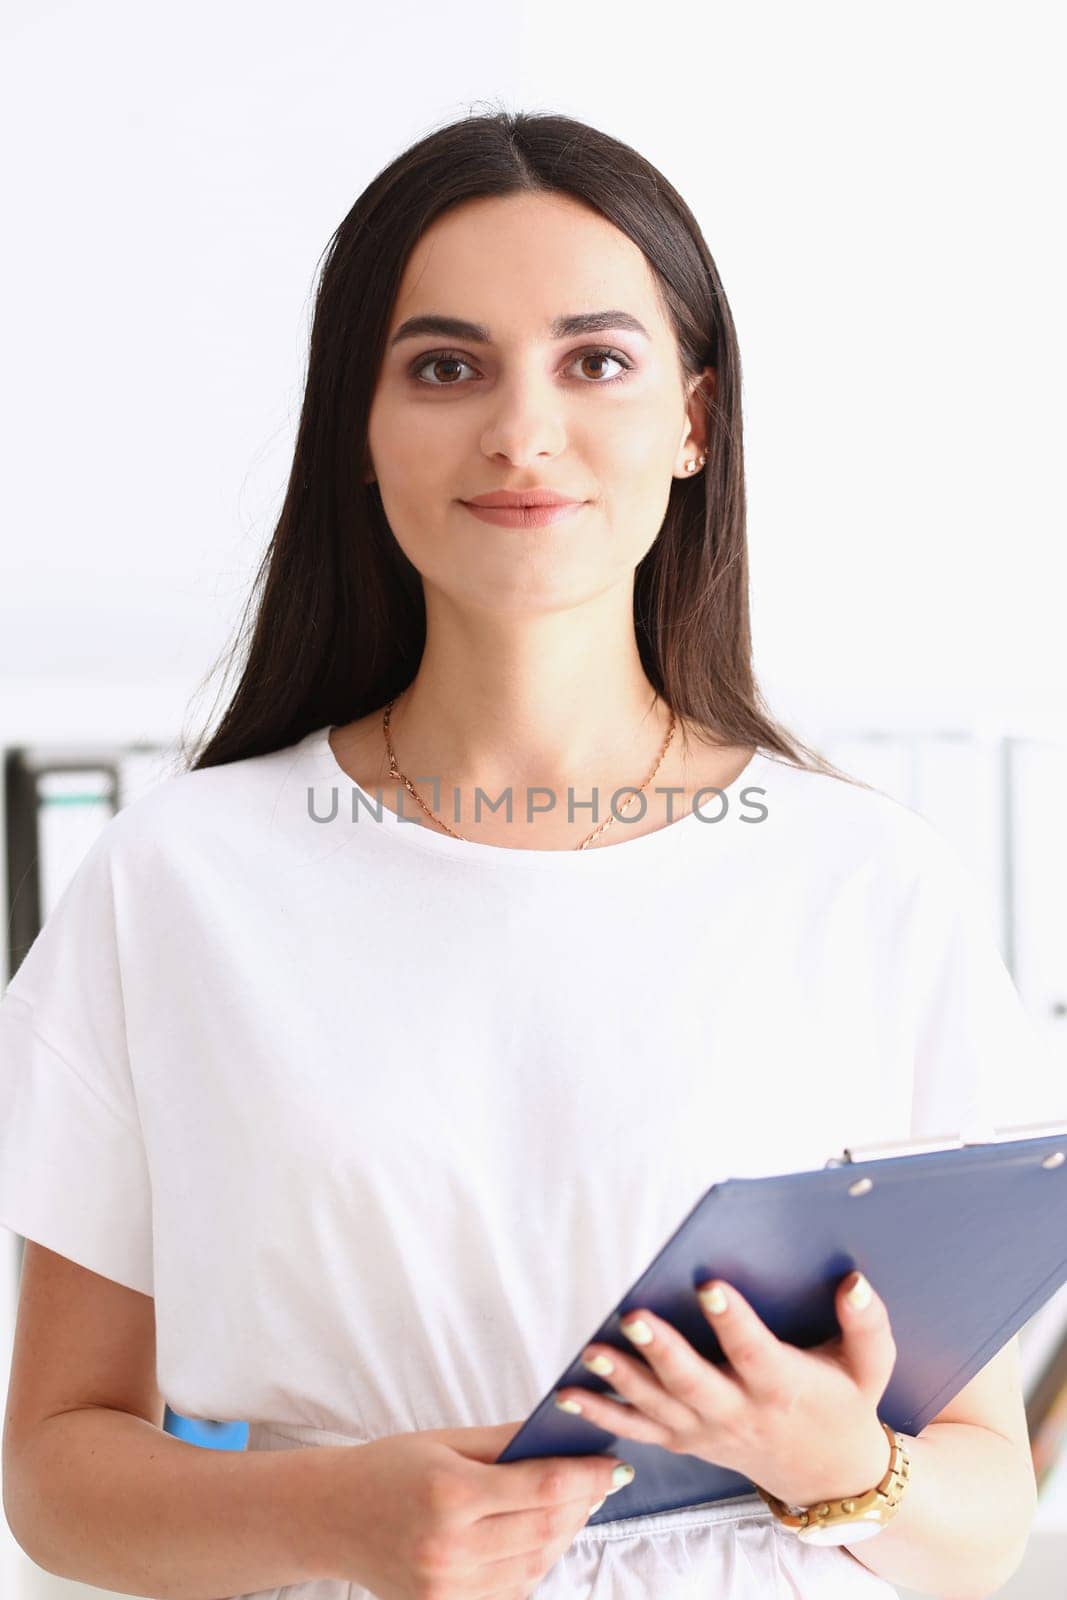 Indian woman worker portrait holding clipboard in hand smiling and looking at camera